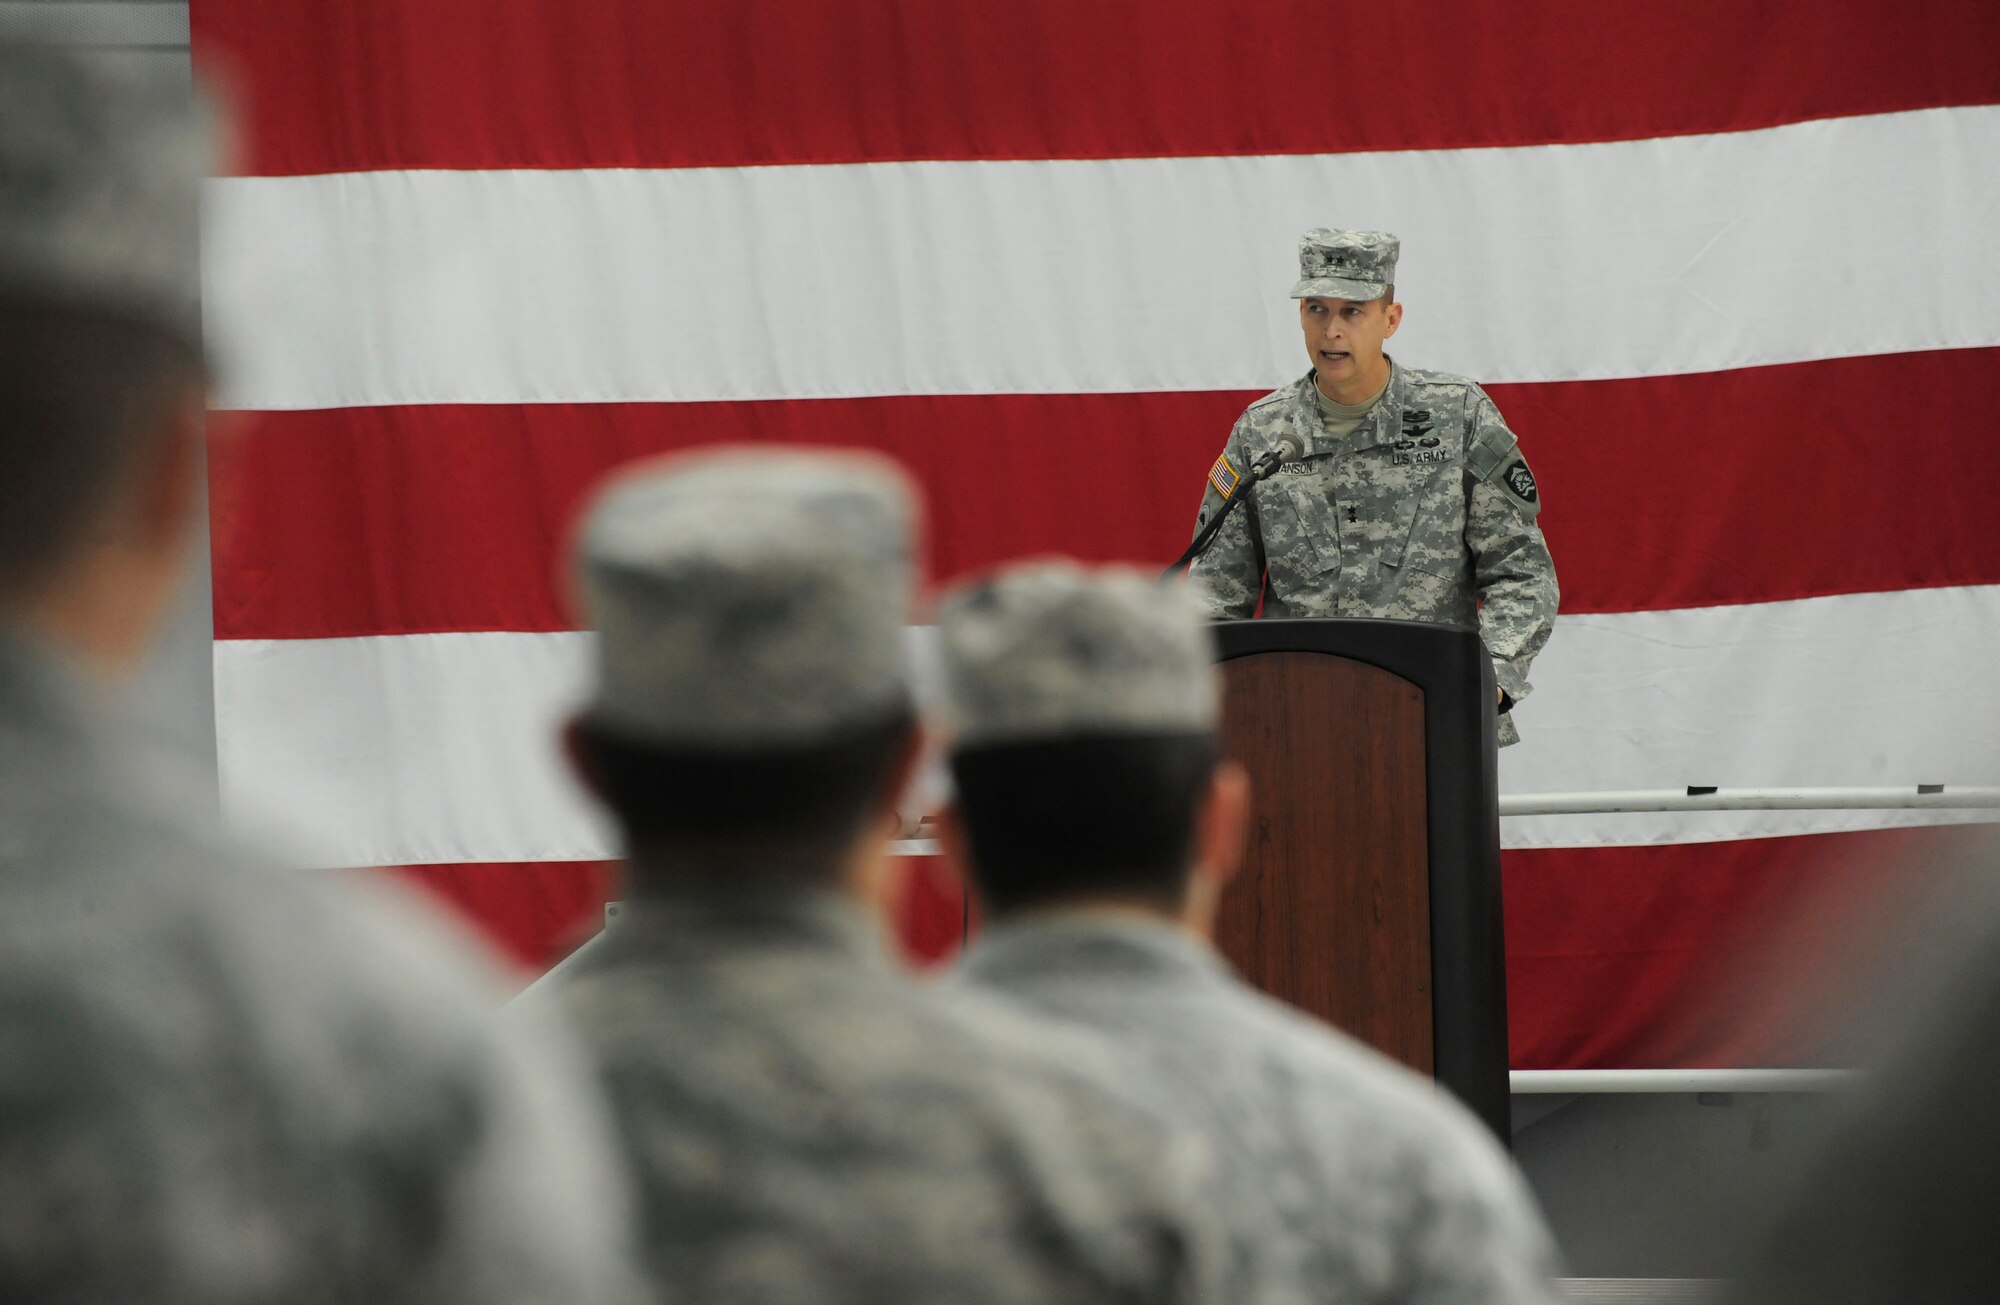 Maj. Gen. Daniel R. Hokanson, The Adjutant General, Oregon, address those in attendance at the Demobilization Ceremony for the 142nd Fighter Wing Civil Engineer Squadron and Security Forces Squadron at the Portland Air National Guard Base, Ore., Dec. 7, 2014. (U.S. Air National Guard photo by Tech. Sgt. John Hughel, 142nd Fighter Wing Public Affairs/Released)